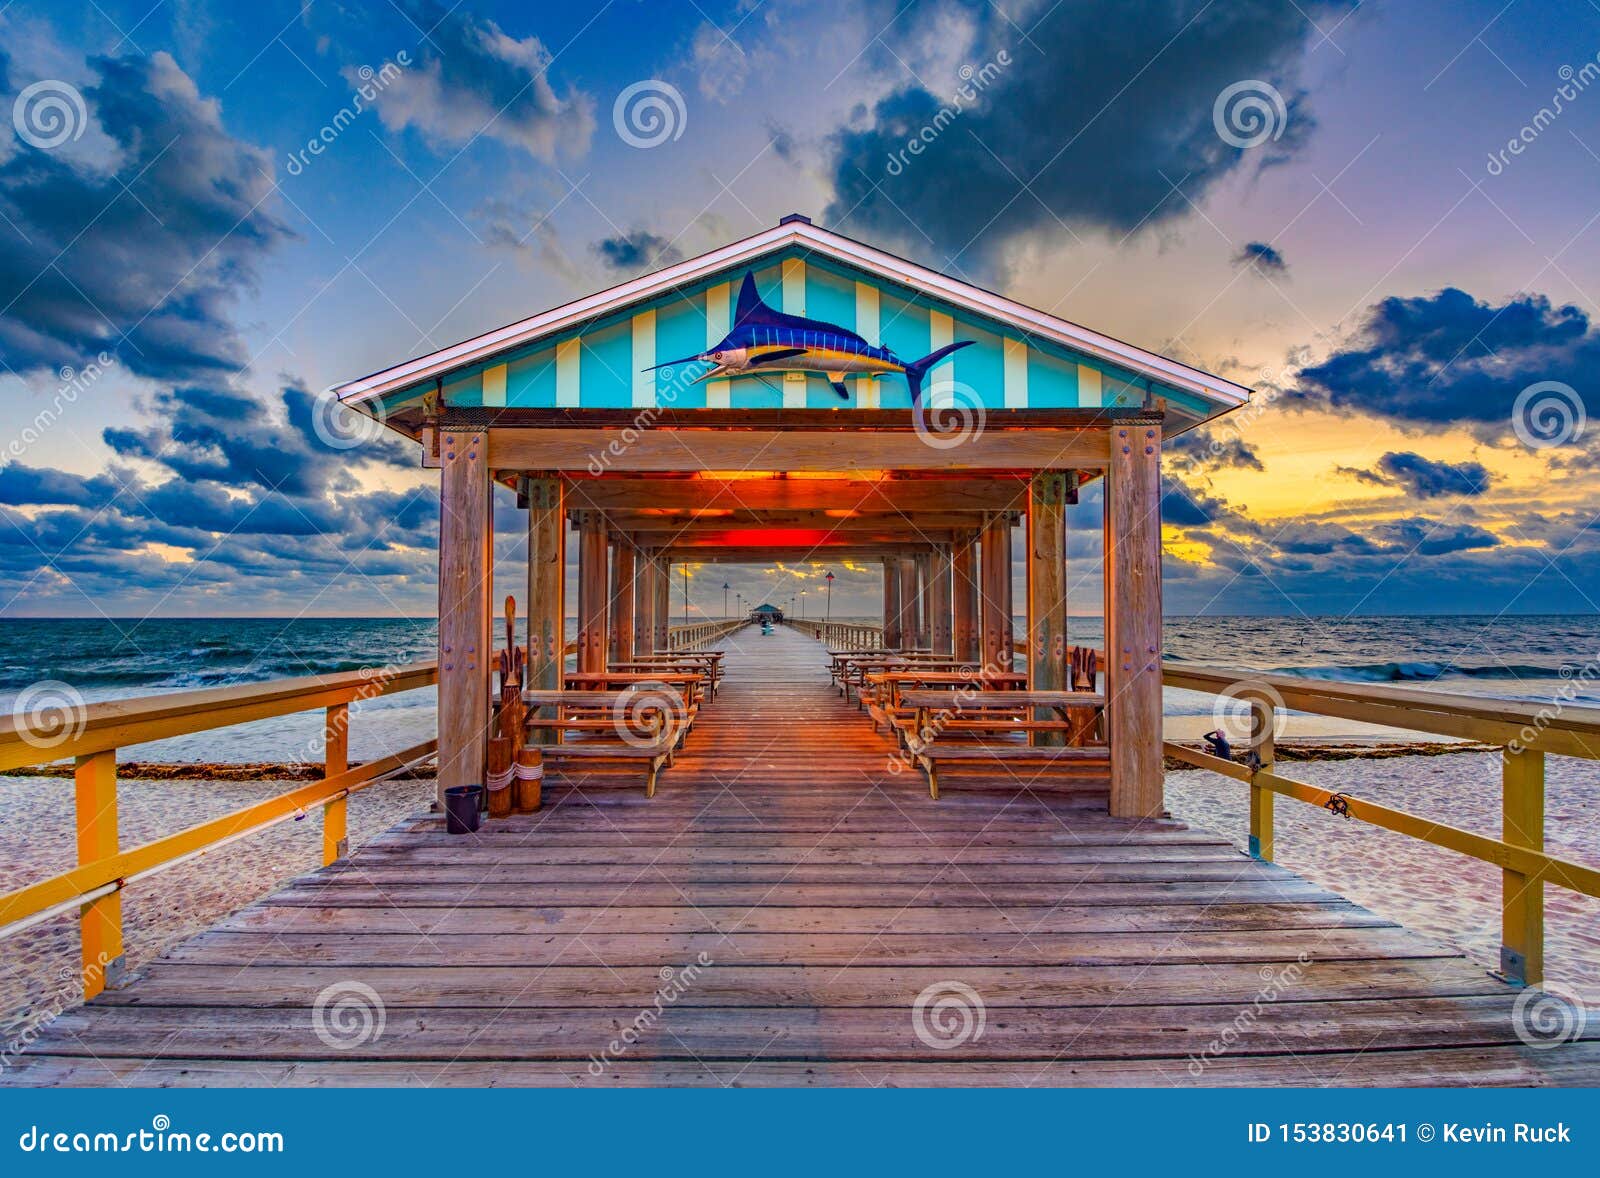 pier in fort lauderdale, florida, usa